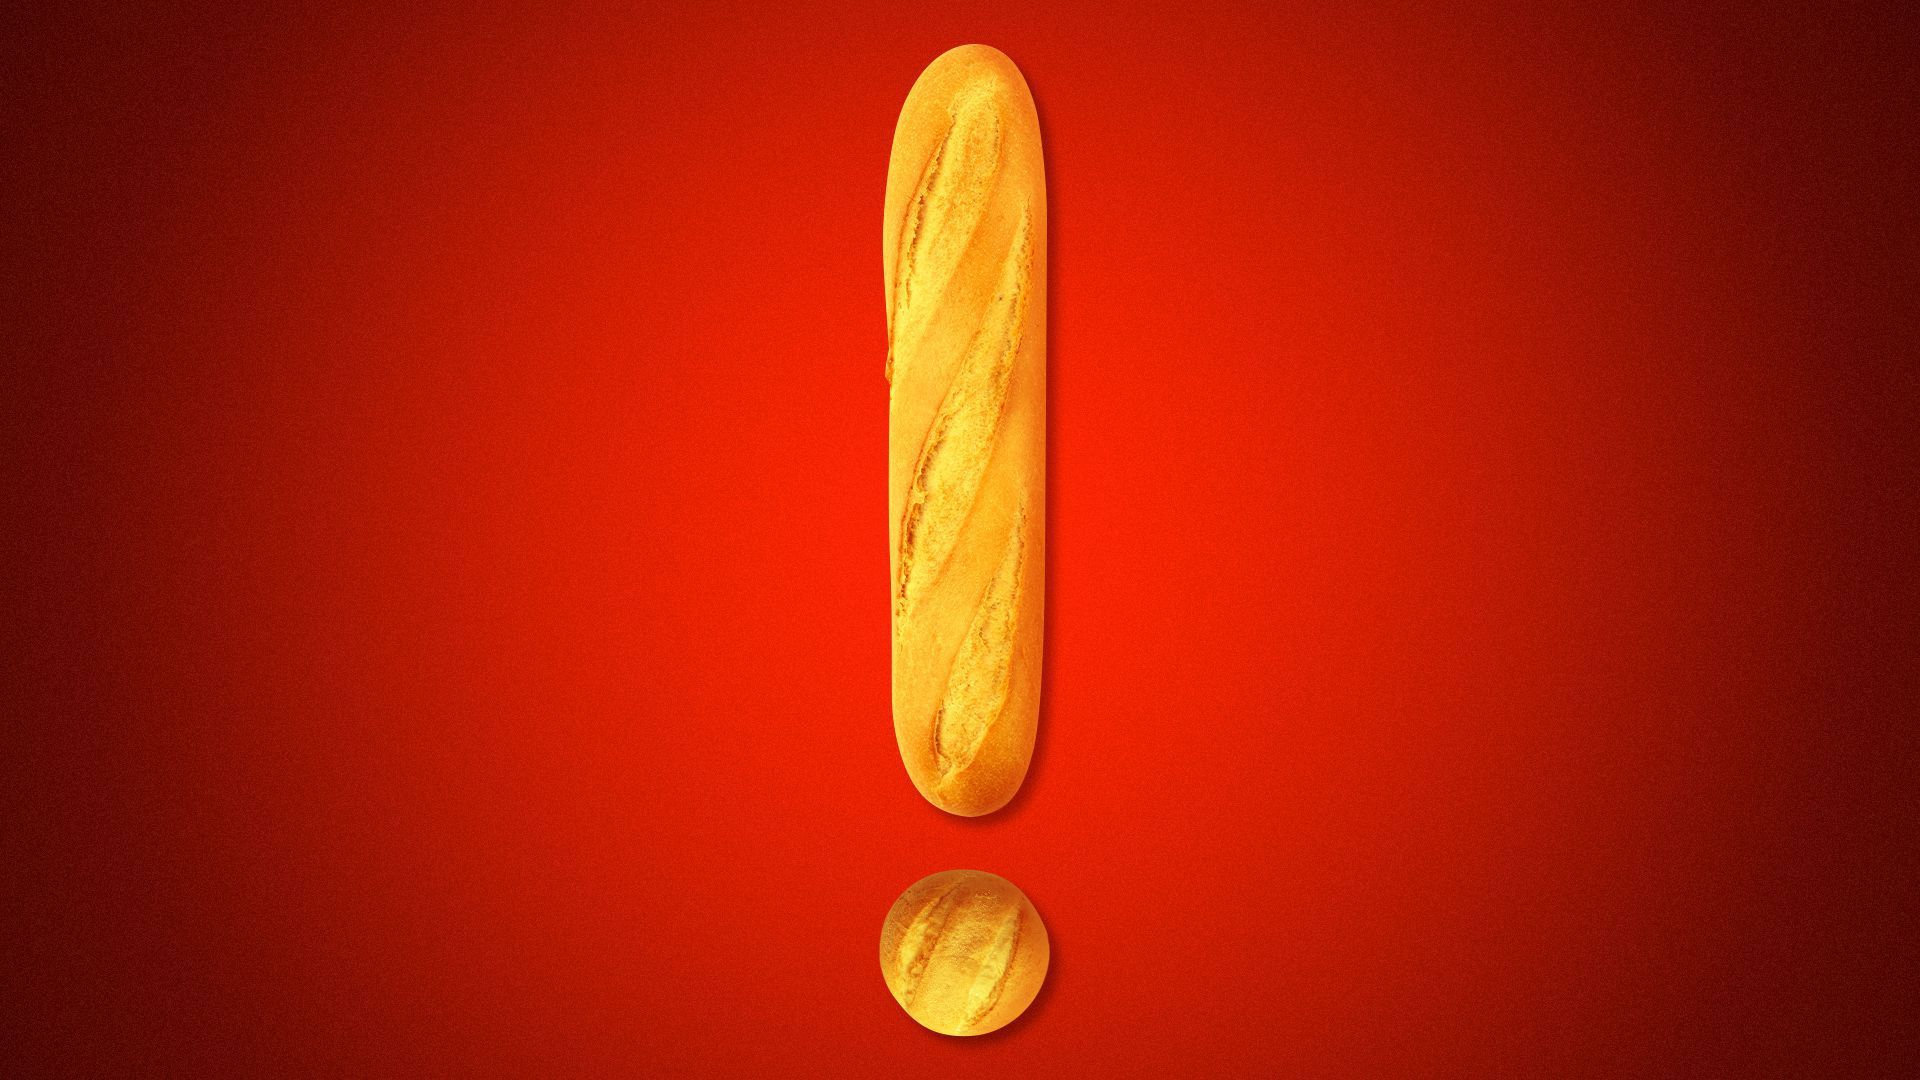 exclamation mark made of bread